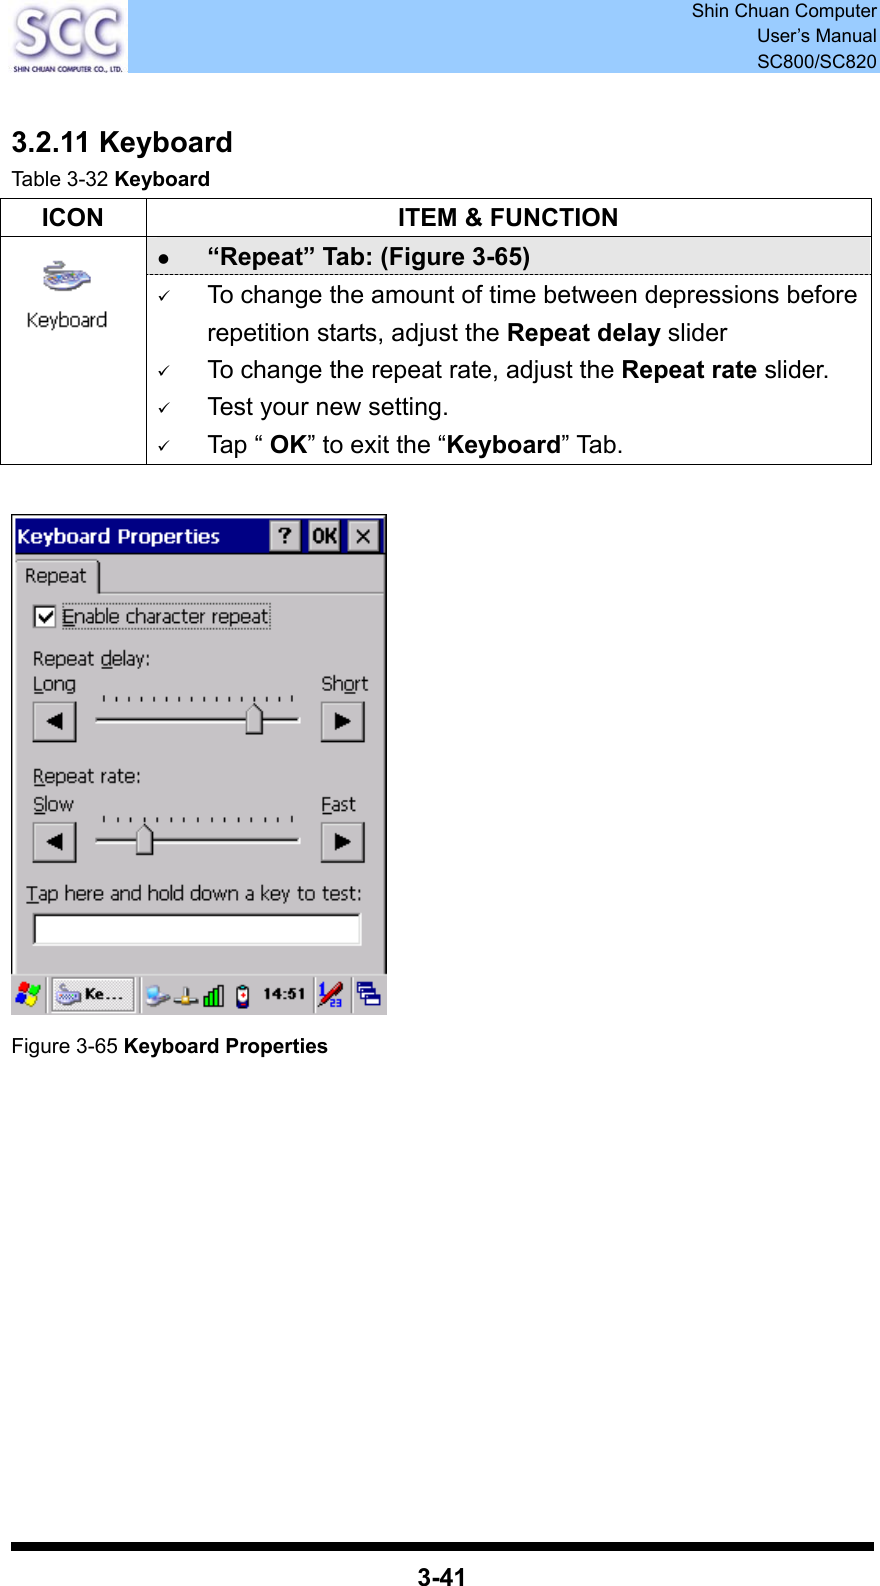  Shin Chuan Computer User’s Manual SC800/SC820  3-41  3.2.11 Keyboard Table 3-32 Keyboard ICON  ITEM &amp; FUNCTION z “Repeat” Tab: (Figure 3-65)    9 To change the amount of time between depressions before repetition starts, adjust the Repeat delay slider 9 To change the repeat rate, adjust the Repeat rate slider. 9 Test your new setting. 9 Tap “ OK” to exit the “Keyboard” Tab.   Figure 3-65 Keyboard Properties             